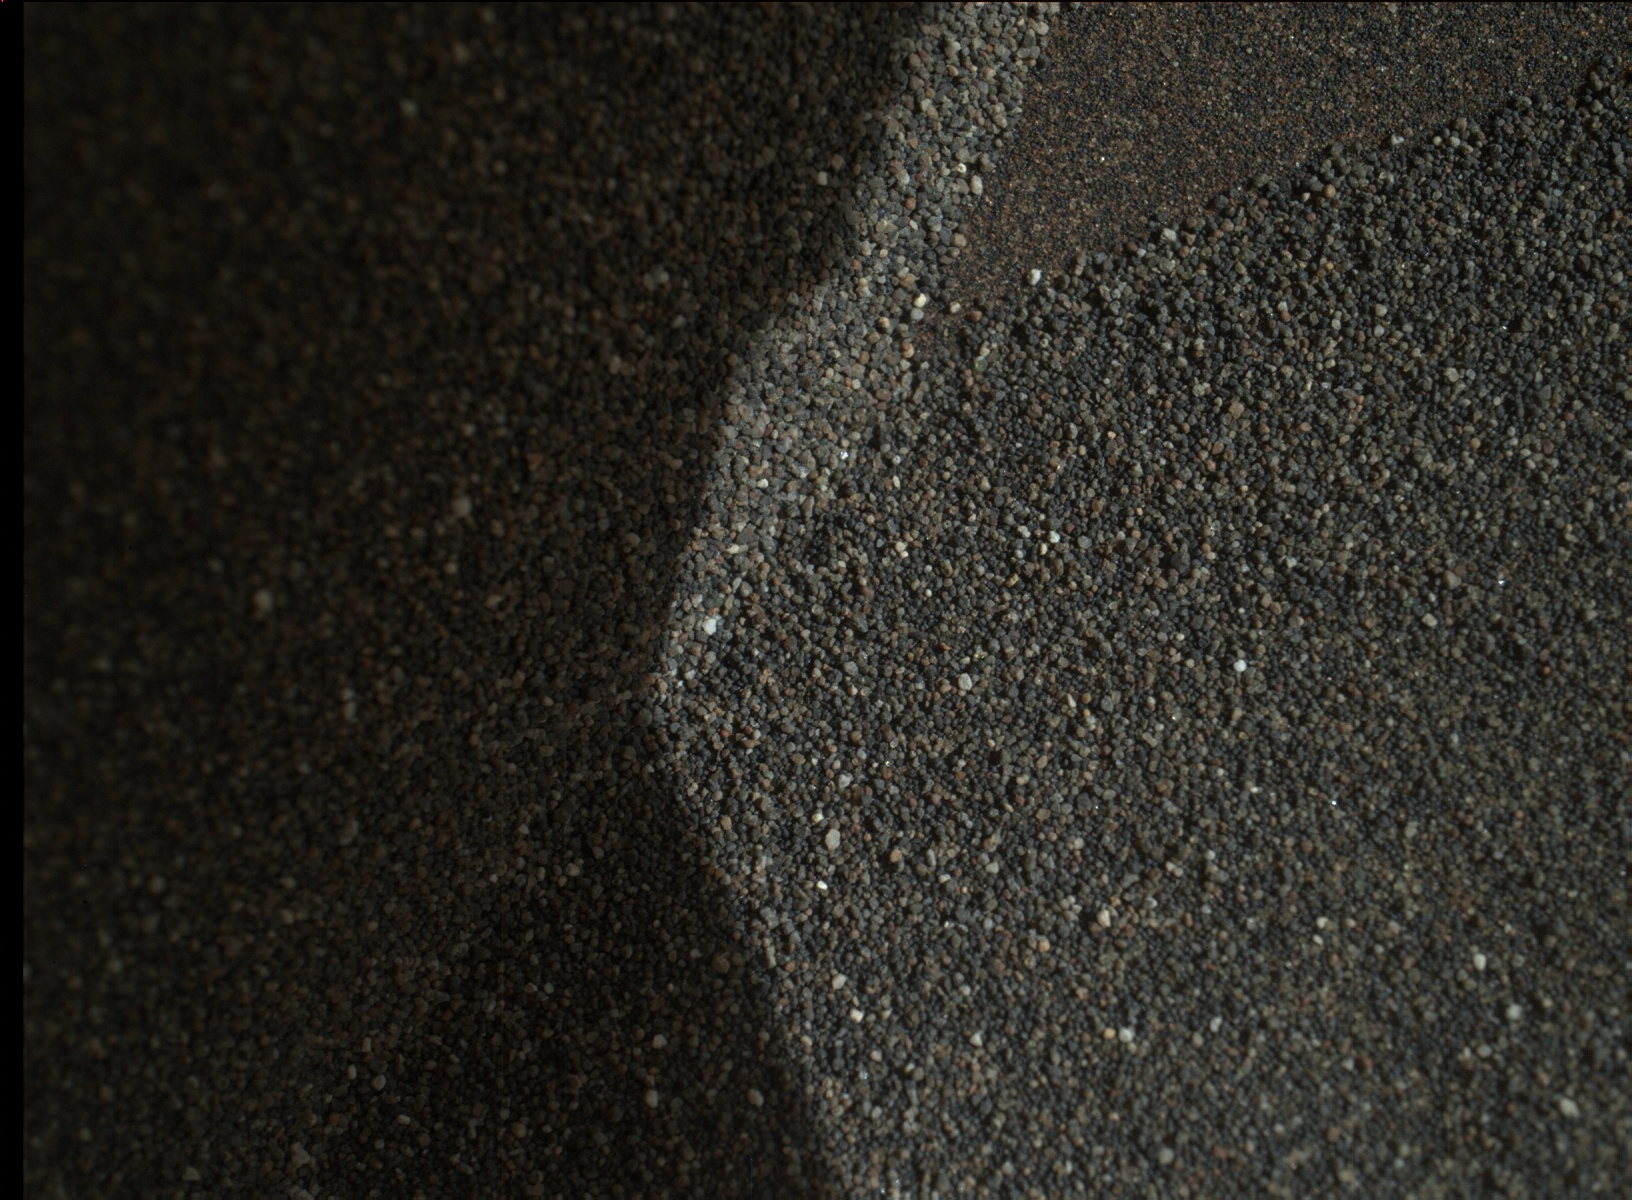 Nasa's Mars rover Curiosity acquired this image using its Mars Hand Lens Imager (MAHLI) on Sol 1228